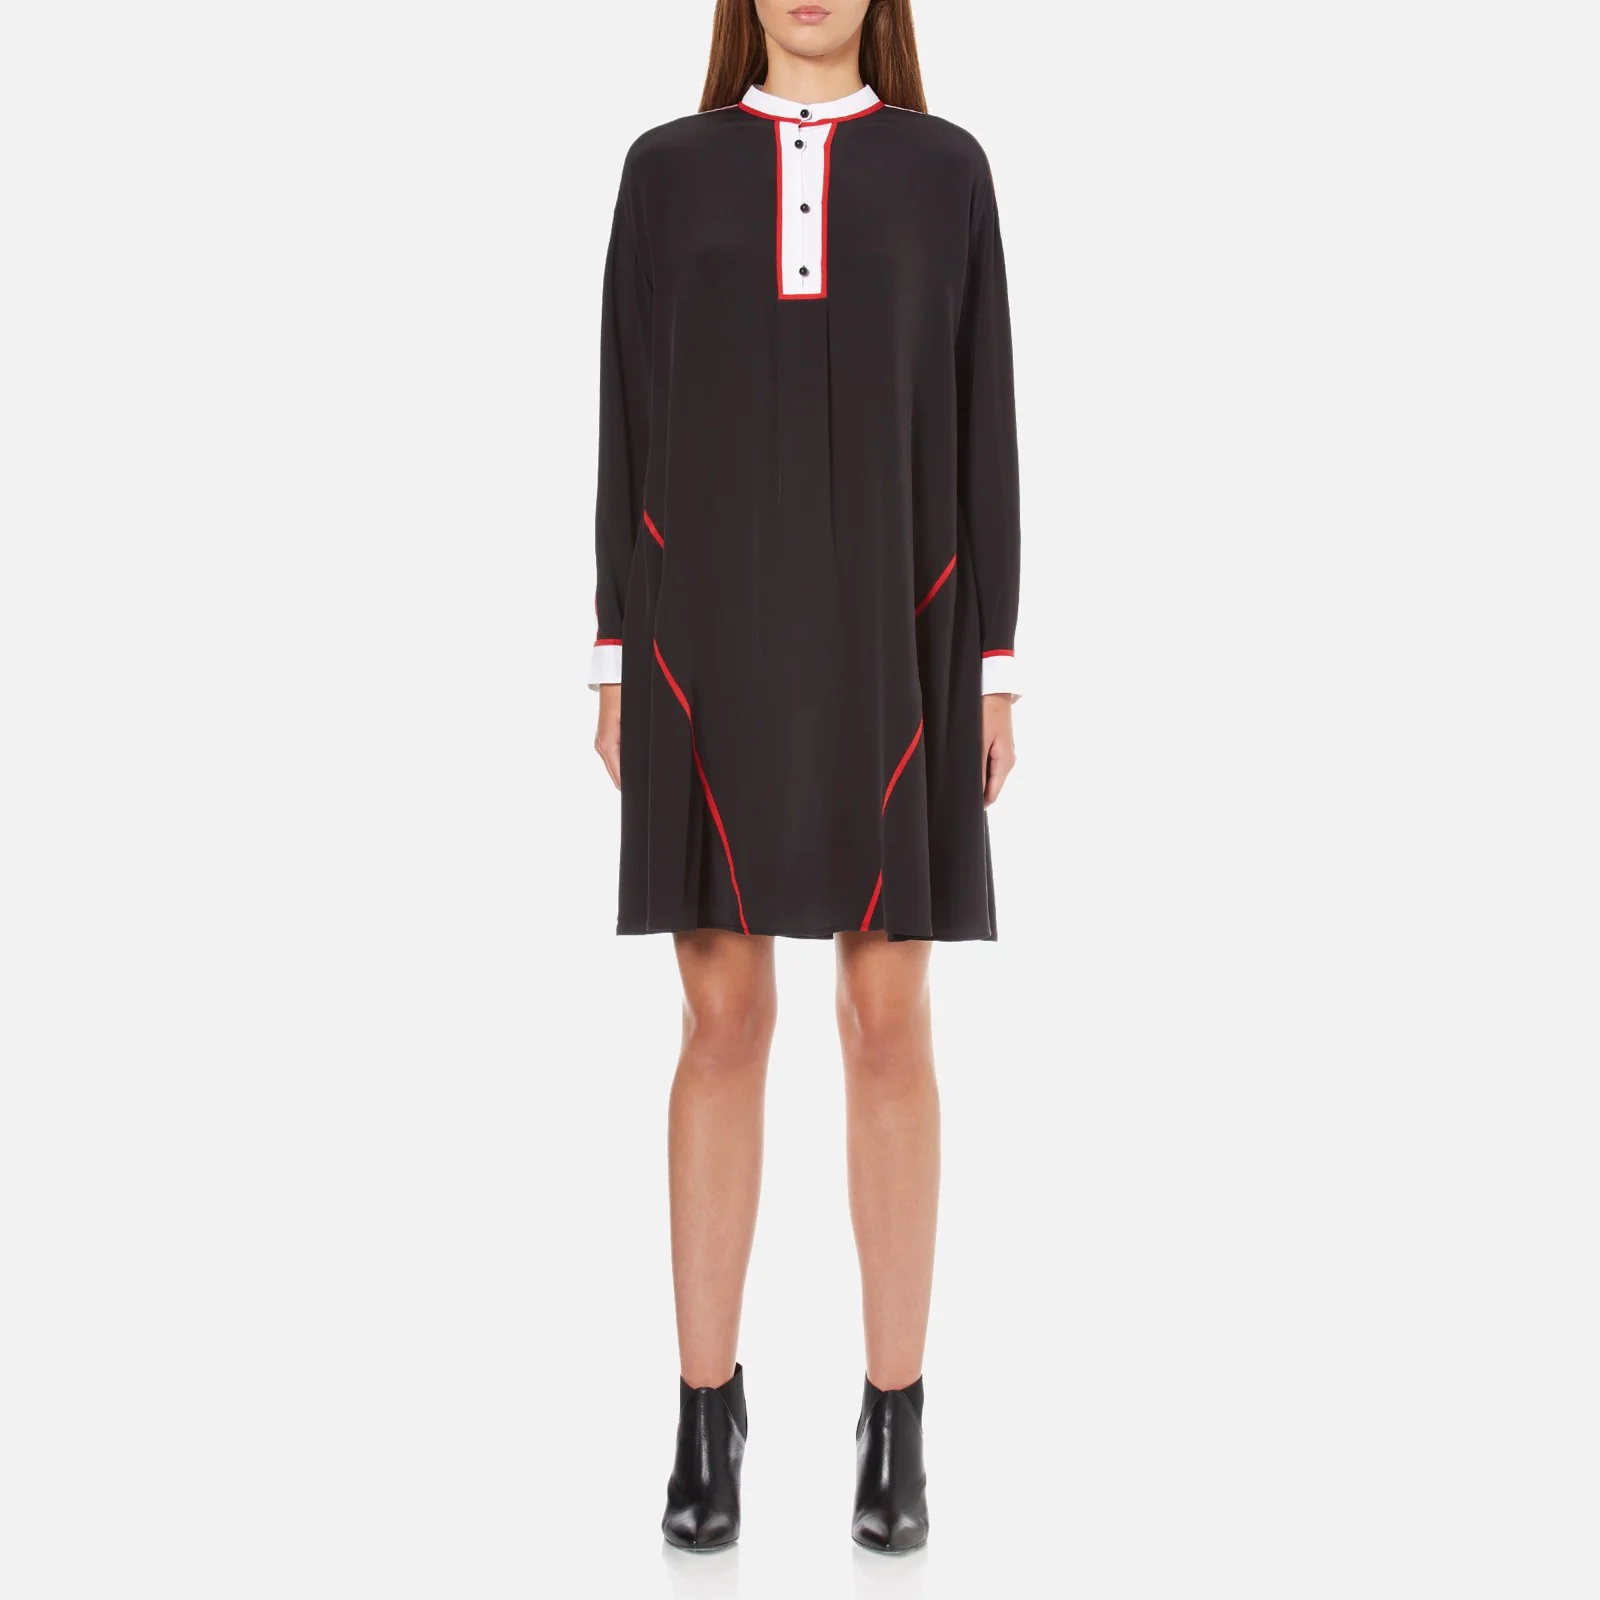 KENZO Women's Flare Dress with Piping and Buttons - Black Image 1